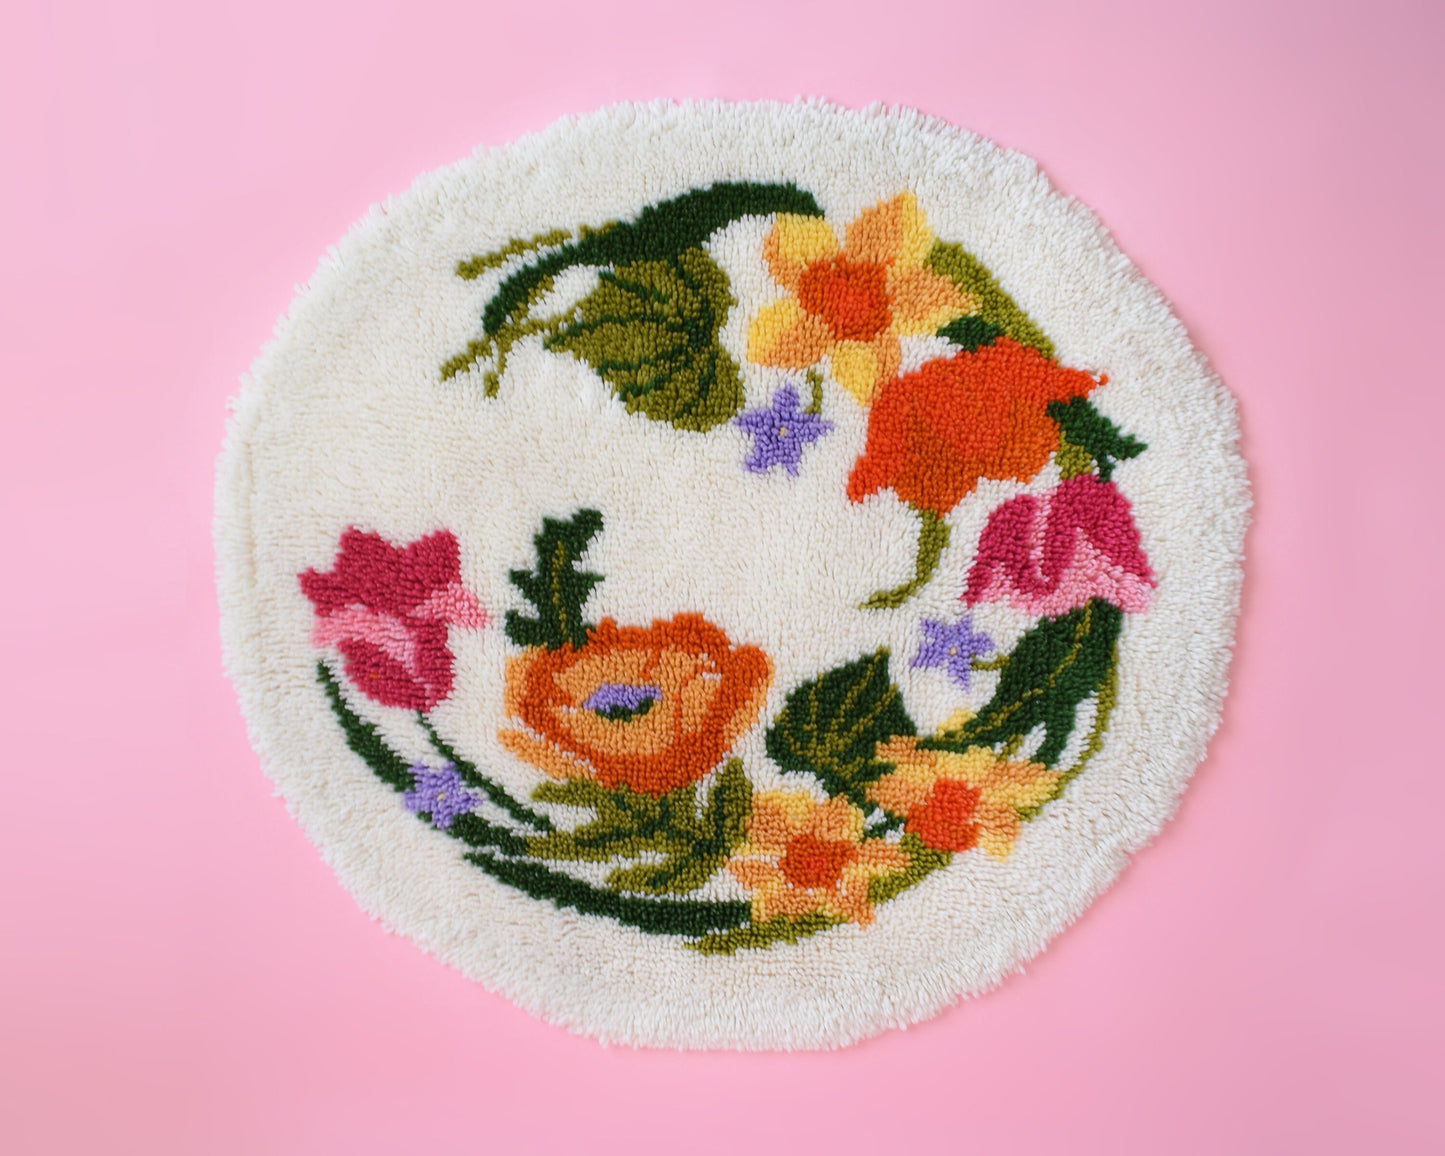 A vintage round floral latch hook rug that has cream white shaggy acrylic with a colorful floral motif in pinks, orange, yellow, purple and greens. The rug is on a pink background.